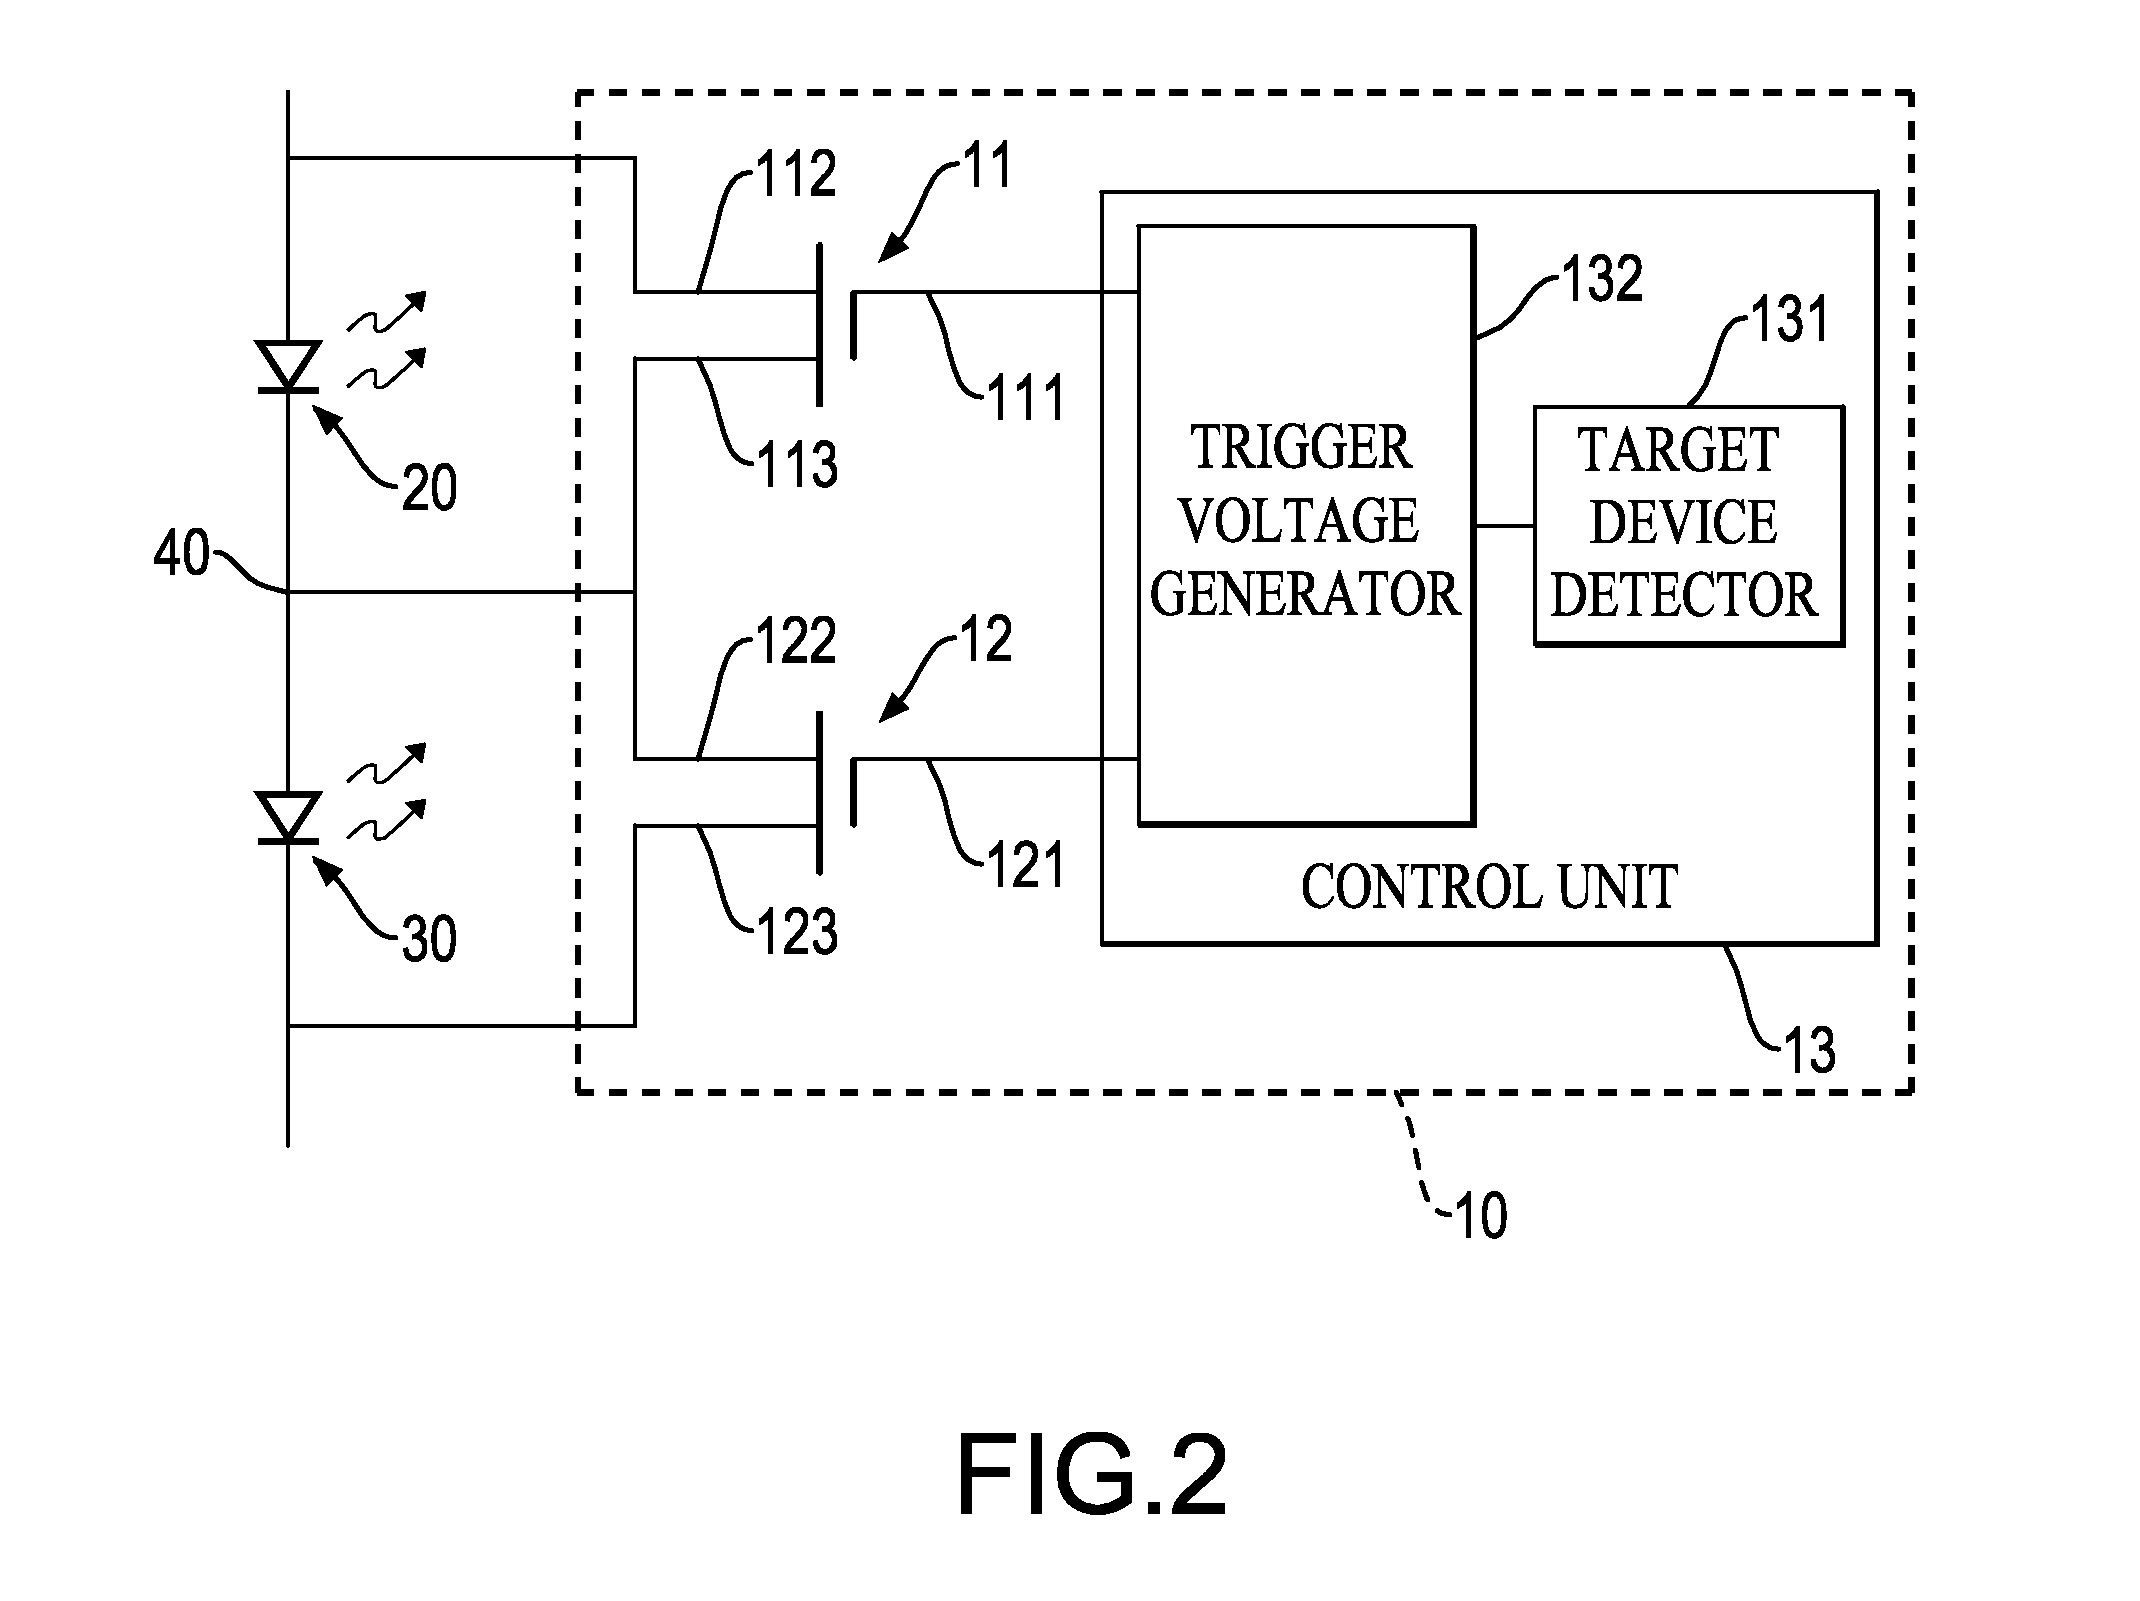 Shunt protection module and method for series connected devices